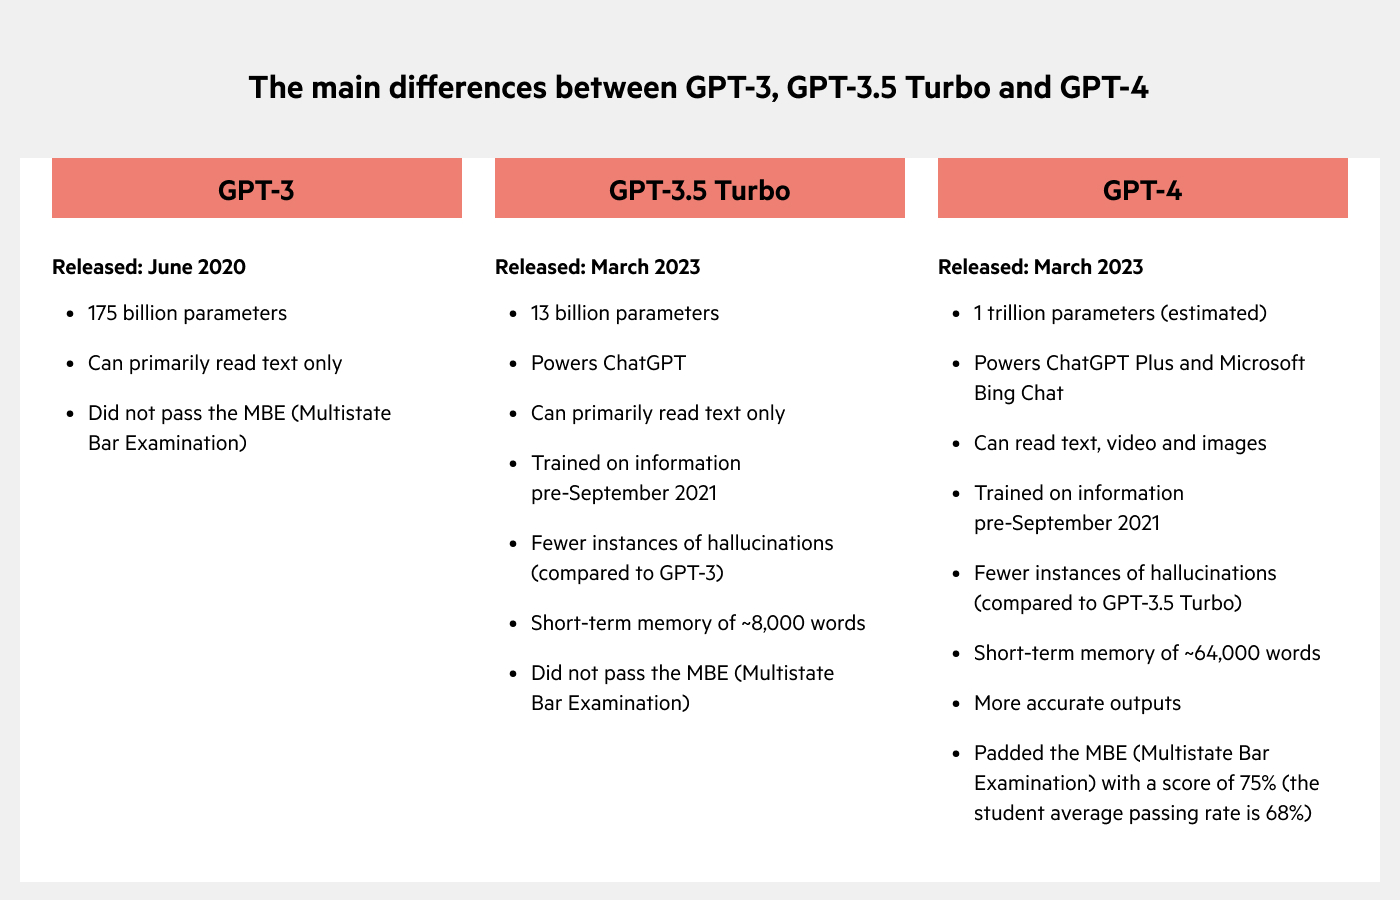 Comparative chart highlighting key differences between OpenAI's GPT-3, GPT-3.5 Turbo, and GPT-4, including release dates, parameter counts, capabilities like reading text or multimedia, training data cutoff, instances of hallucinations, short-term memory, and performance on the Multistate Bar Examination.

